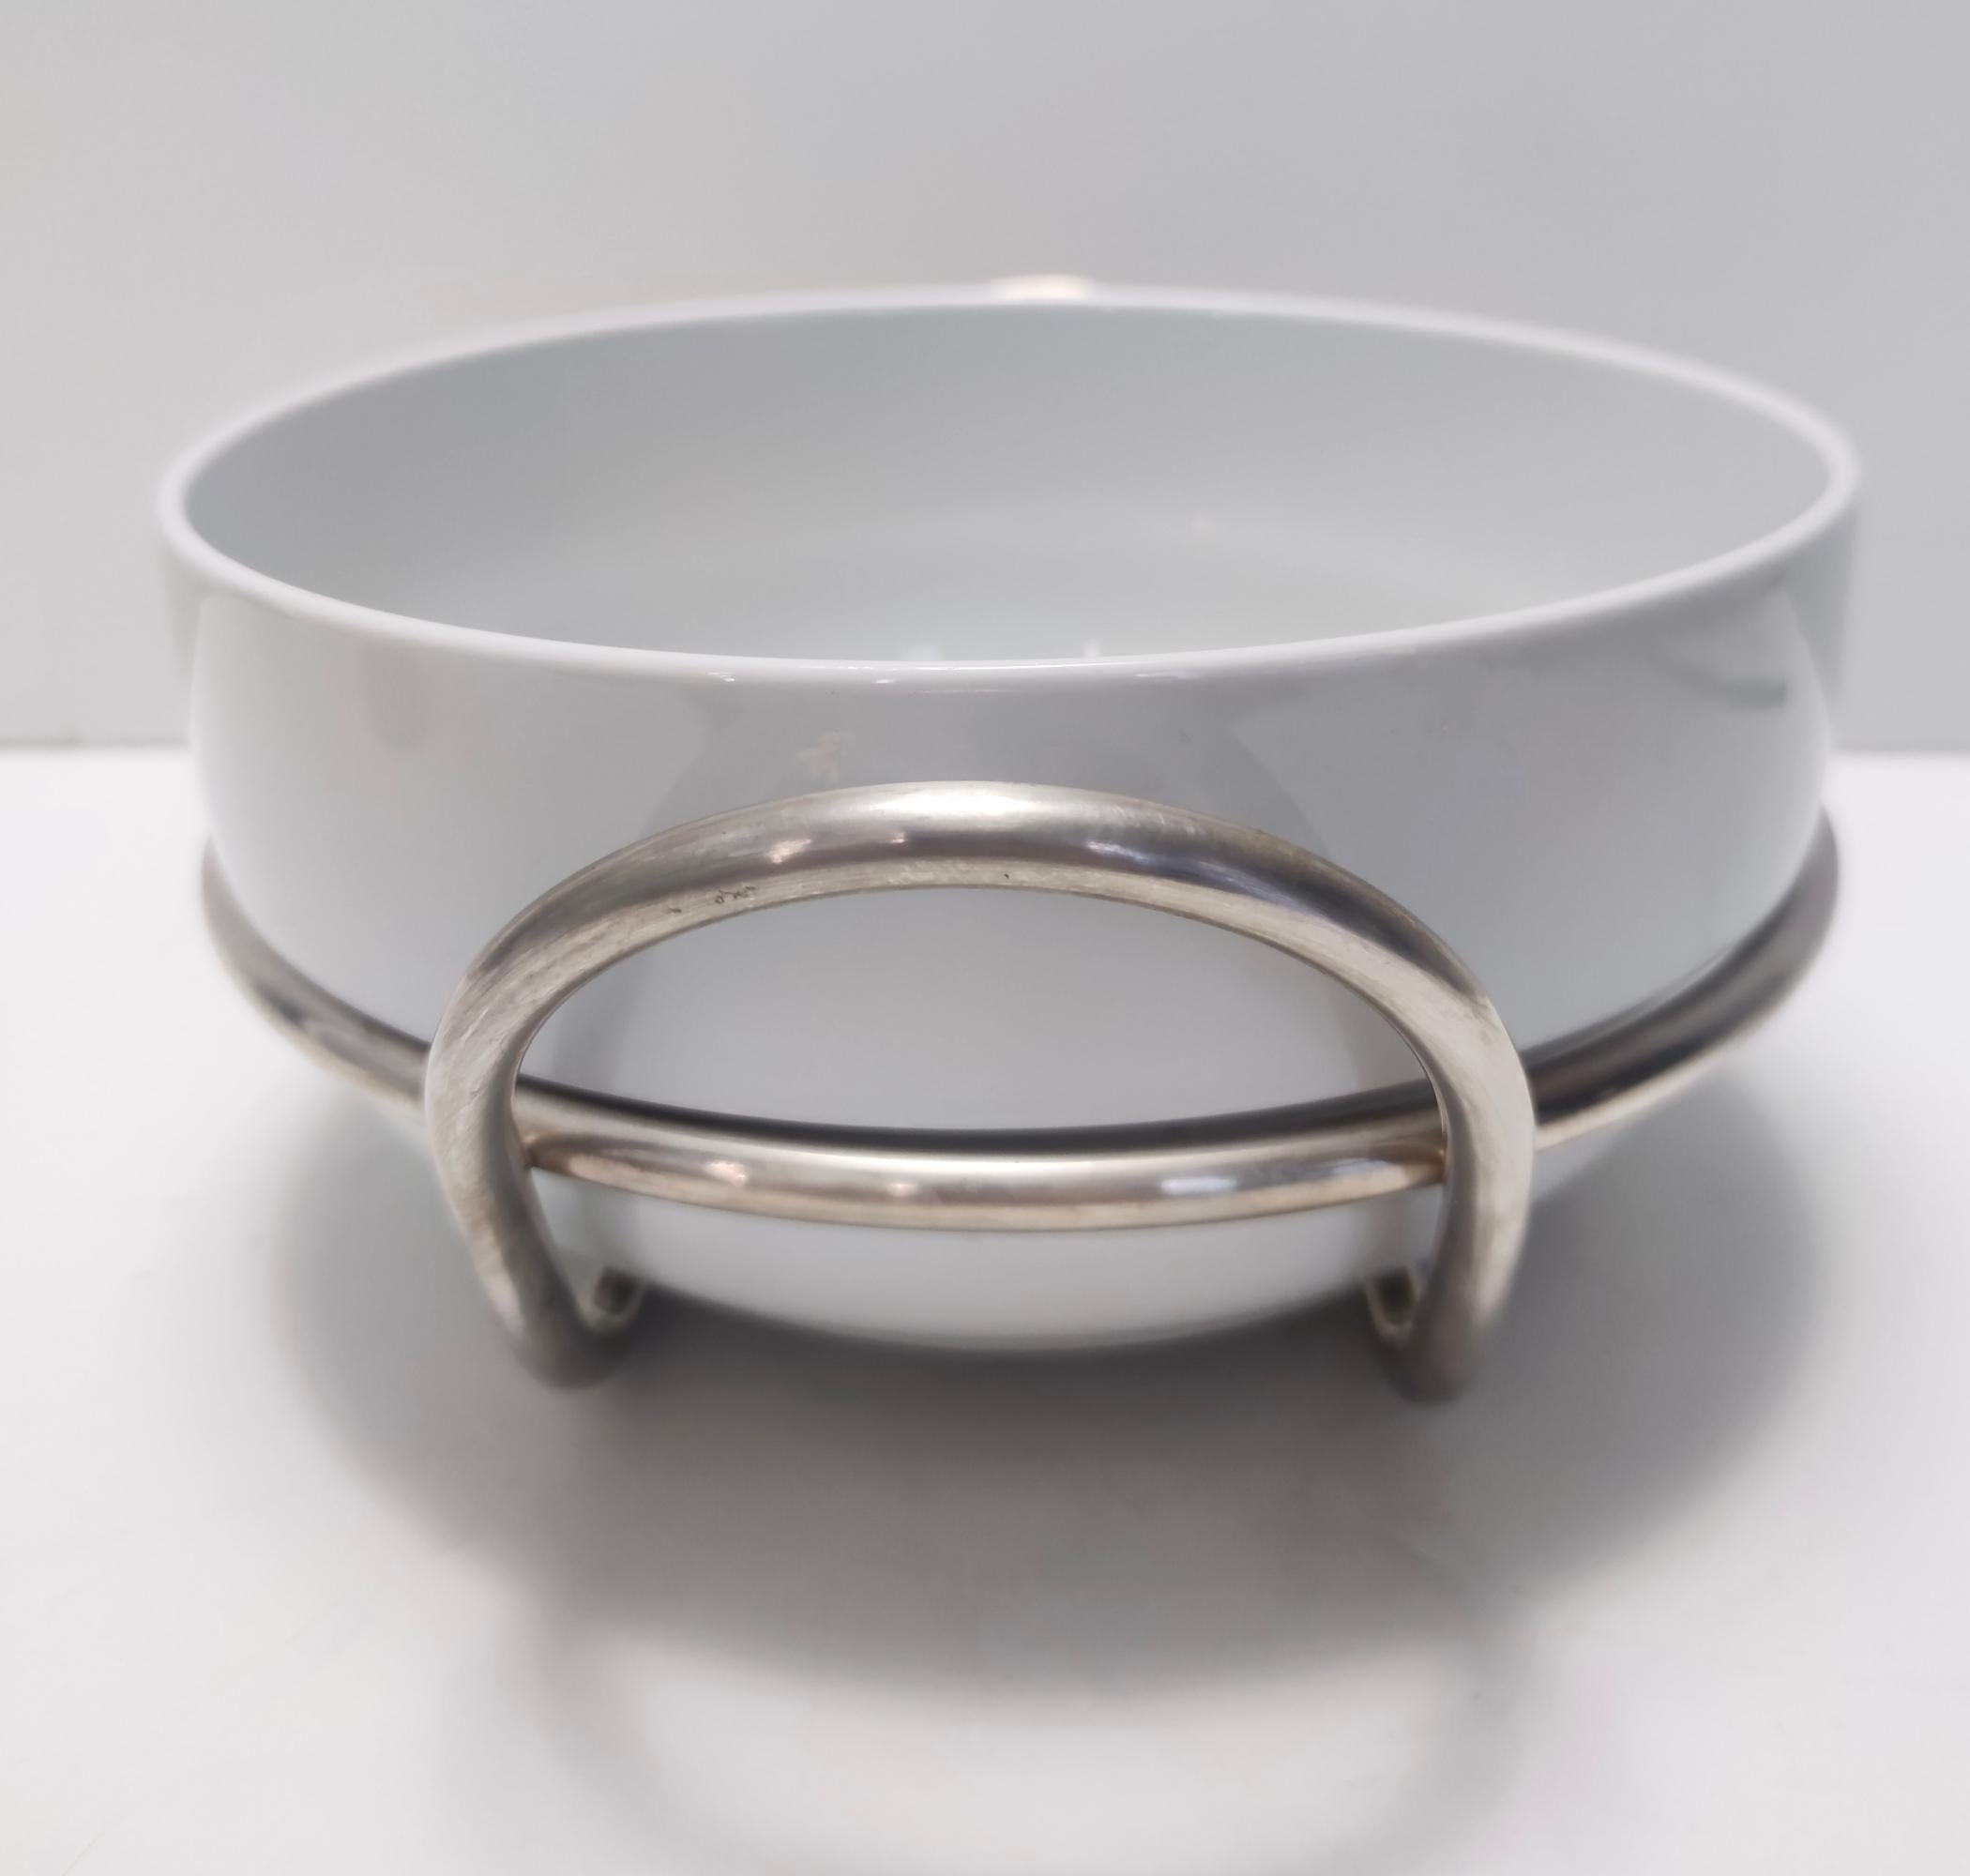 Postmodern Lino Sabattini Silver-Plated and White Ceramic Serving Bowl, Italy For Sale 3